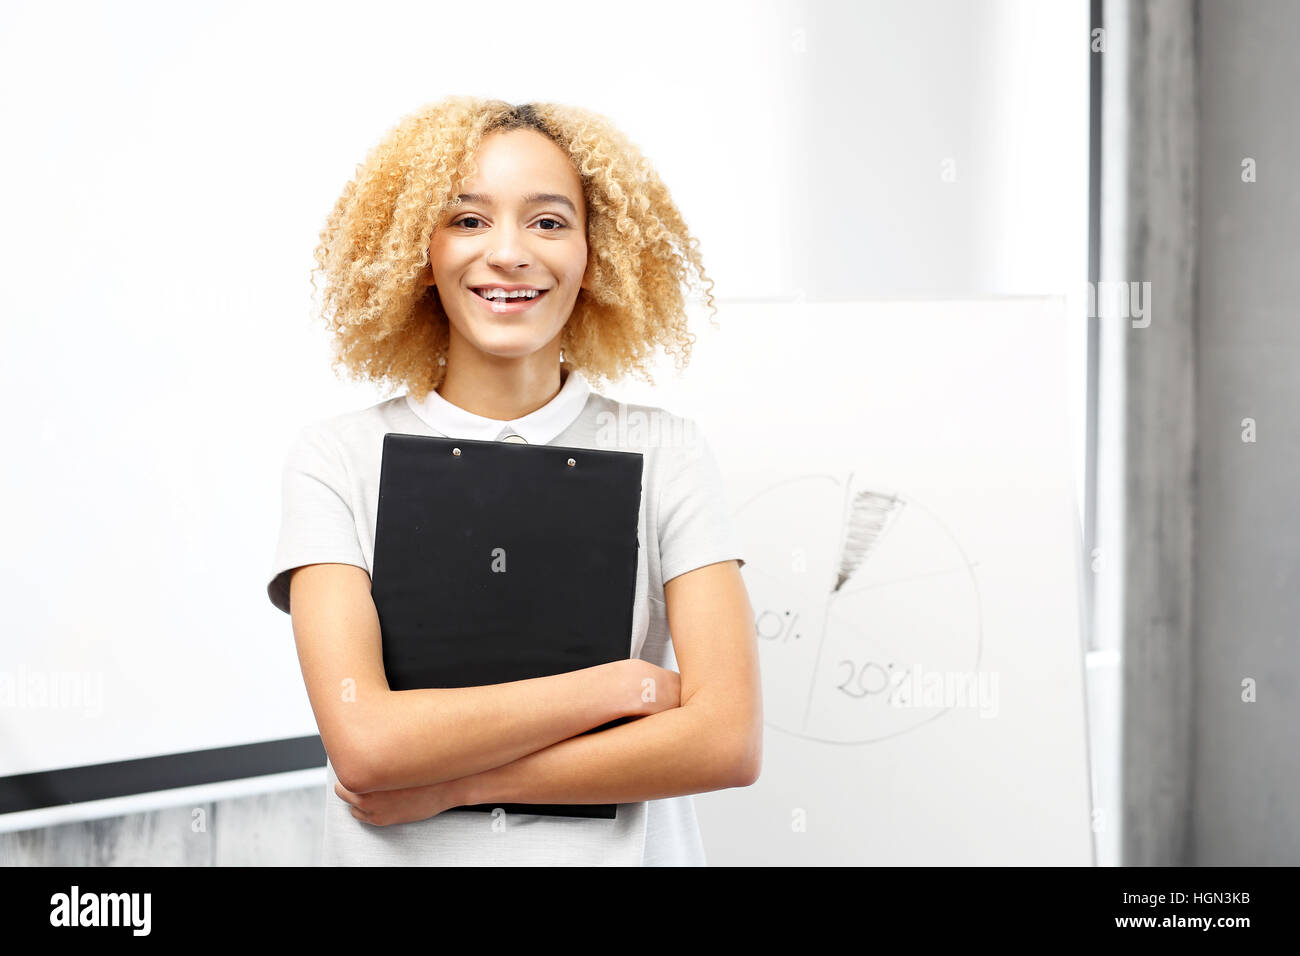 Public speech. A young woman during a business presentation in the conference room. Stock Photo